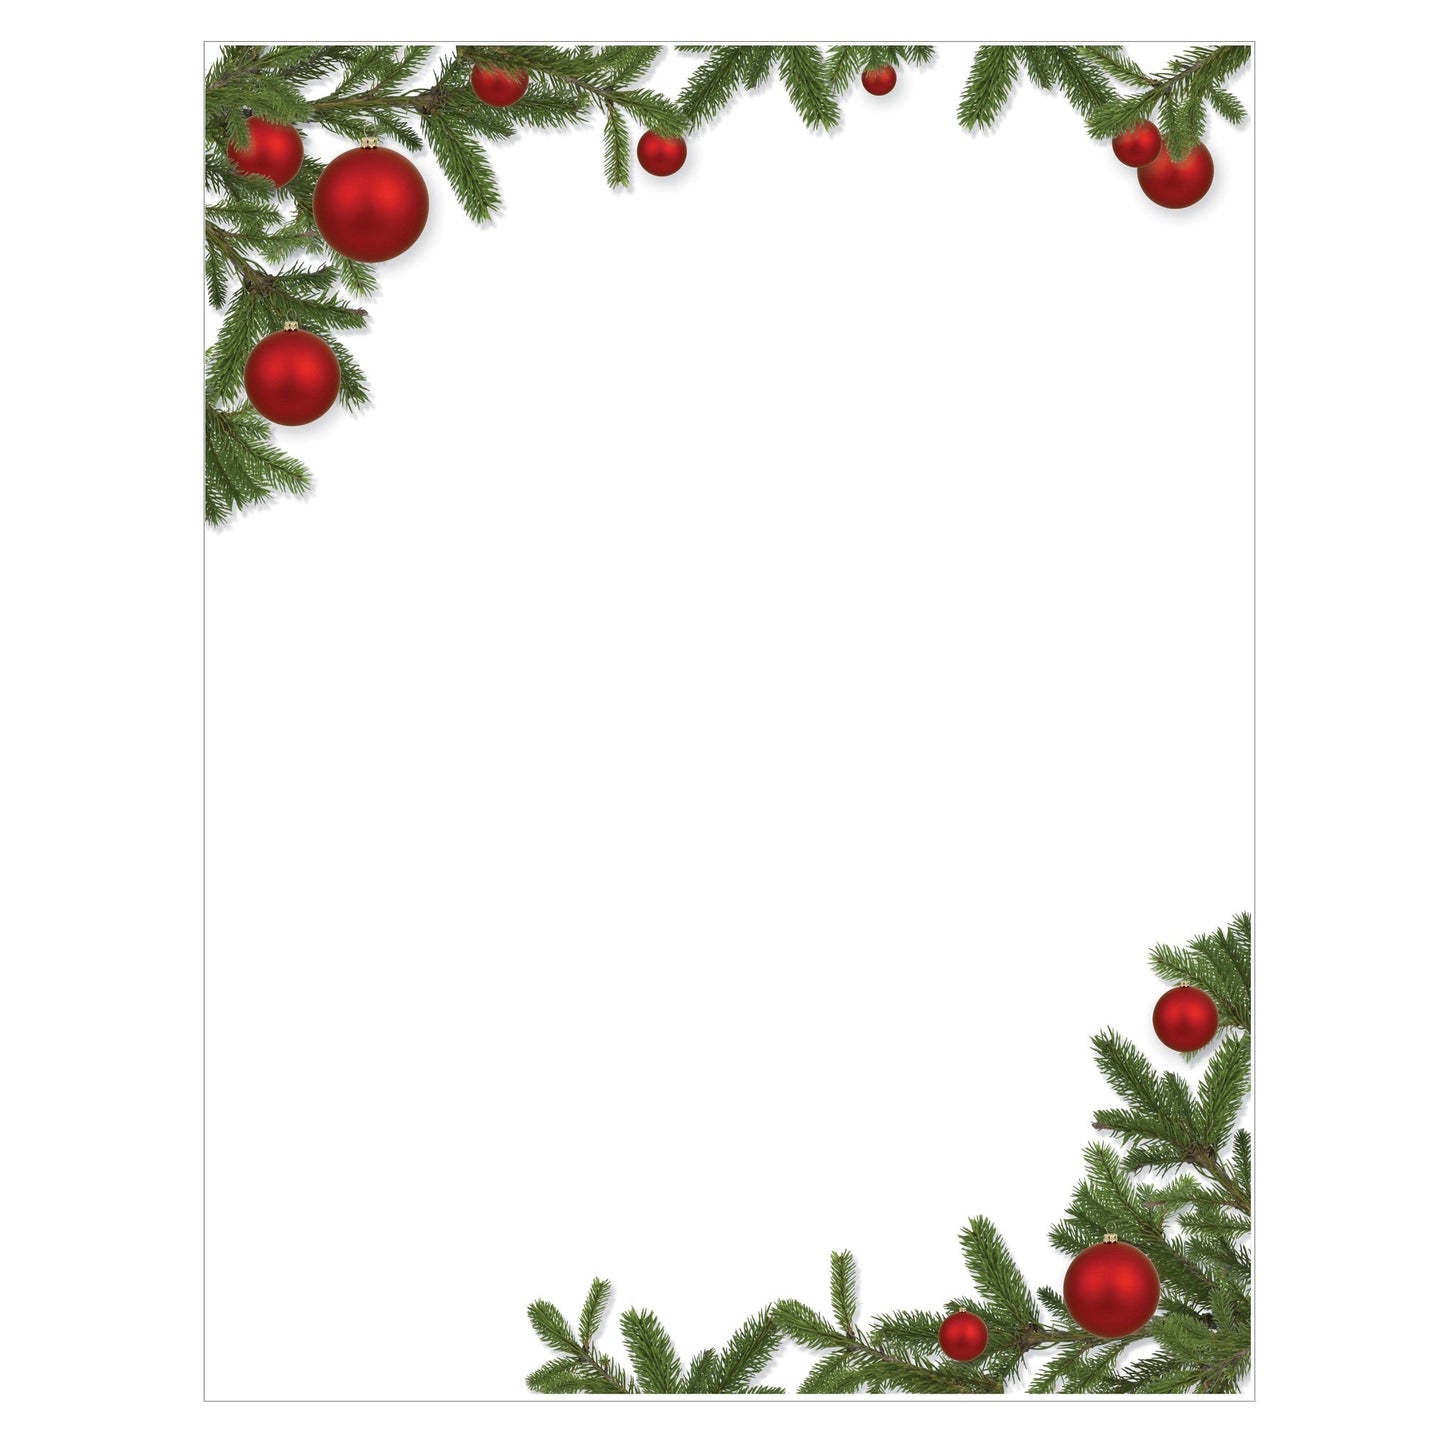 St. James® Holiday Collection, Fir Branches, 8.5 x 11", 24 lb, 25 sheets/pk